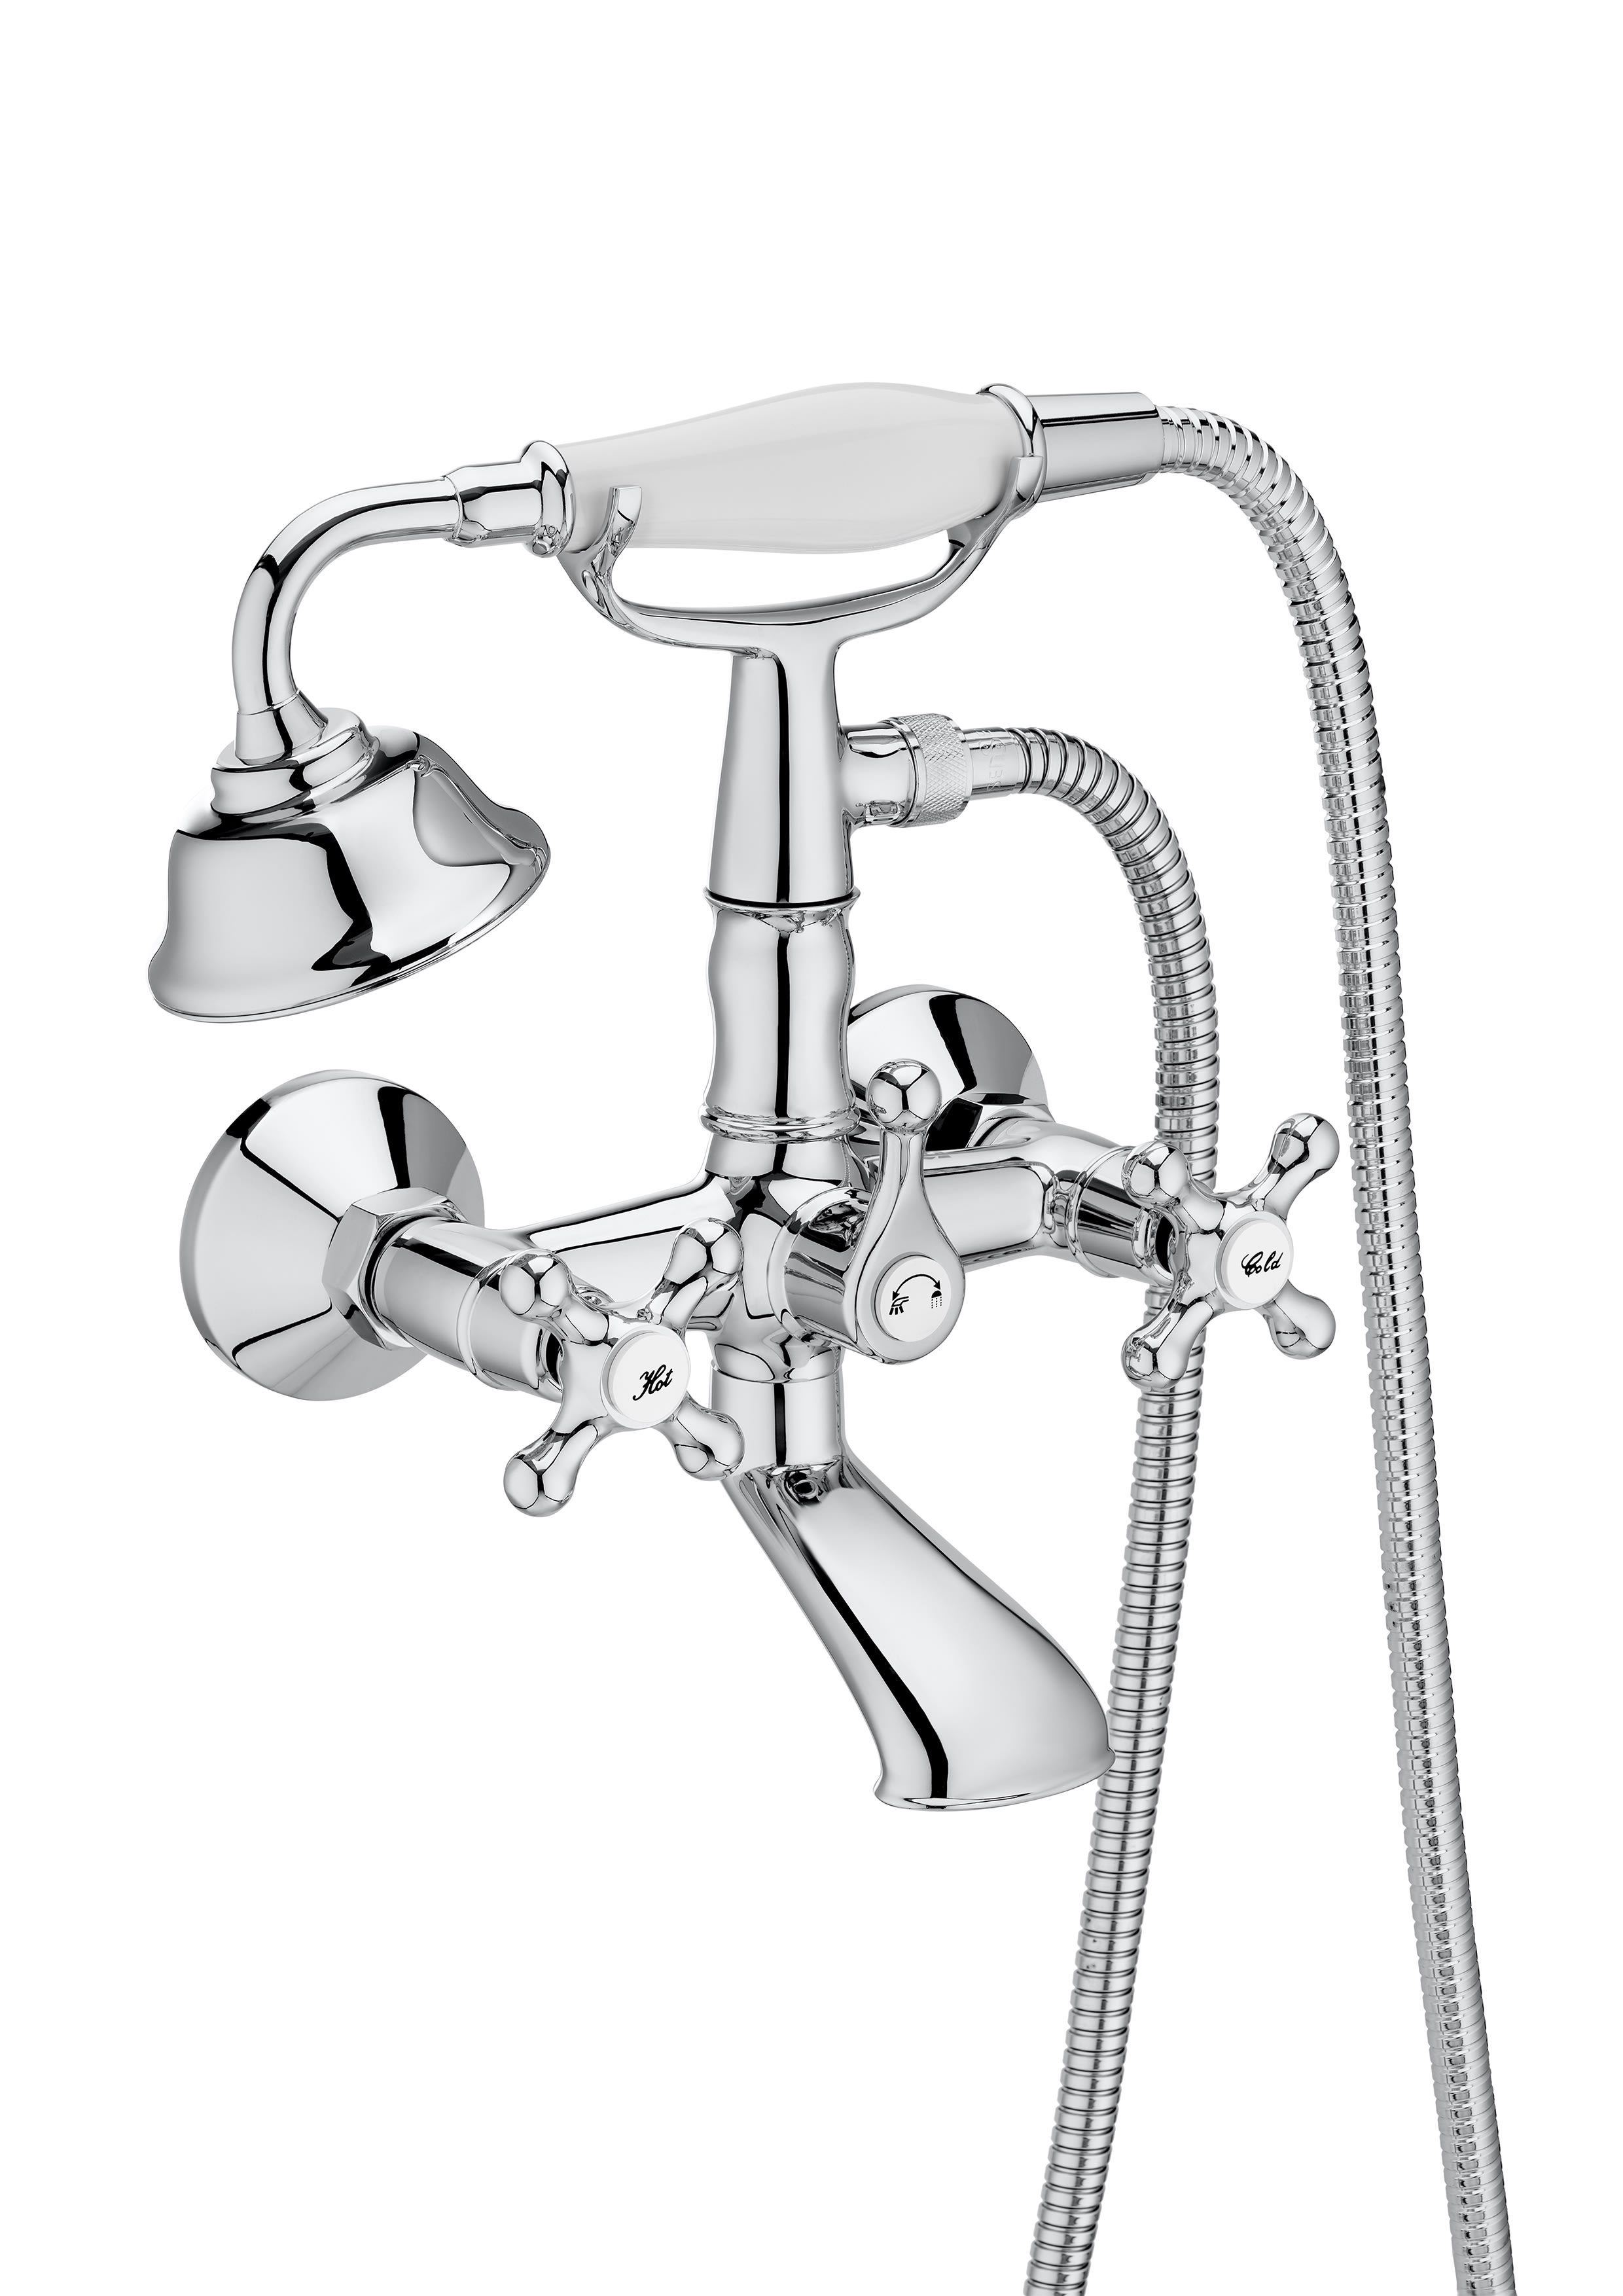 Wall-mounted bath-shower mixer with accessories